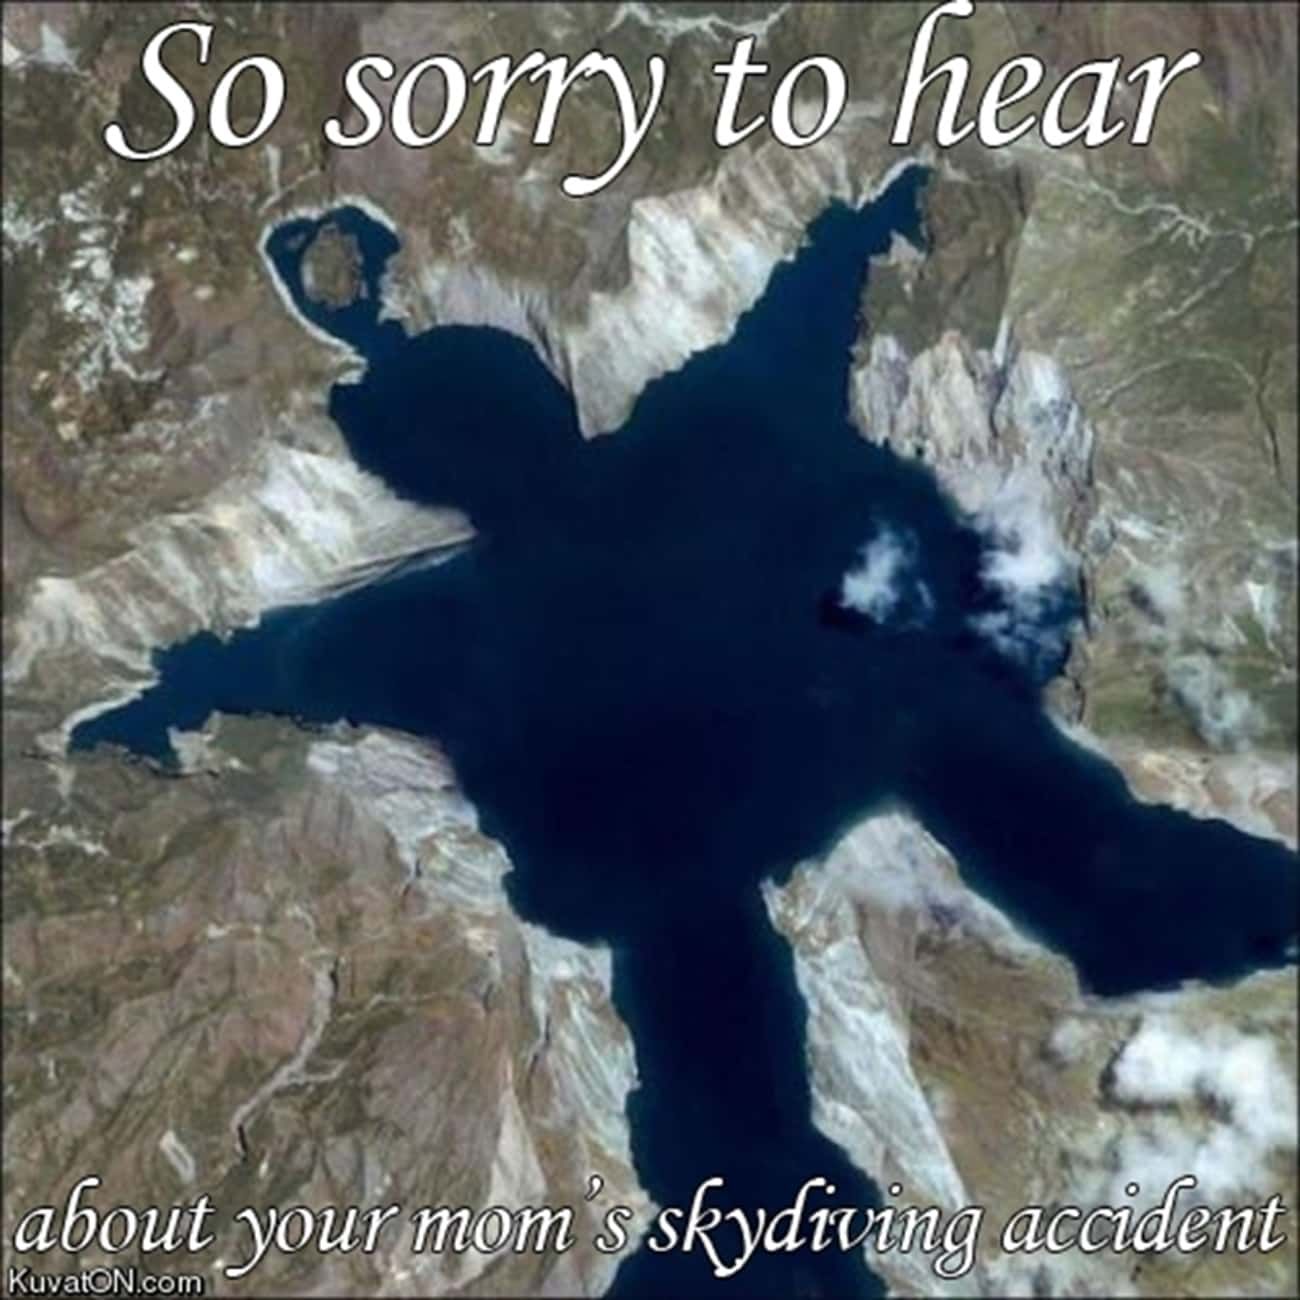 So sorry to hear
about your mom's skydiving accident
KuvatON.com